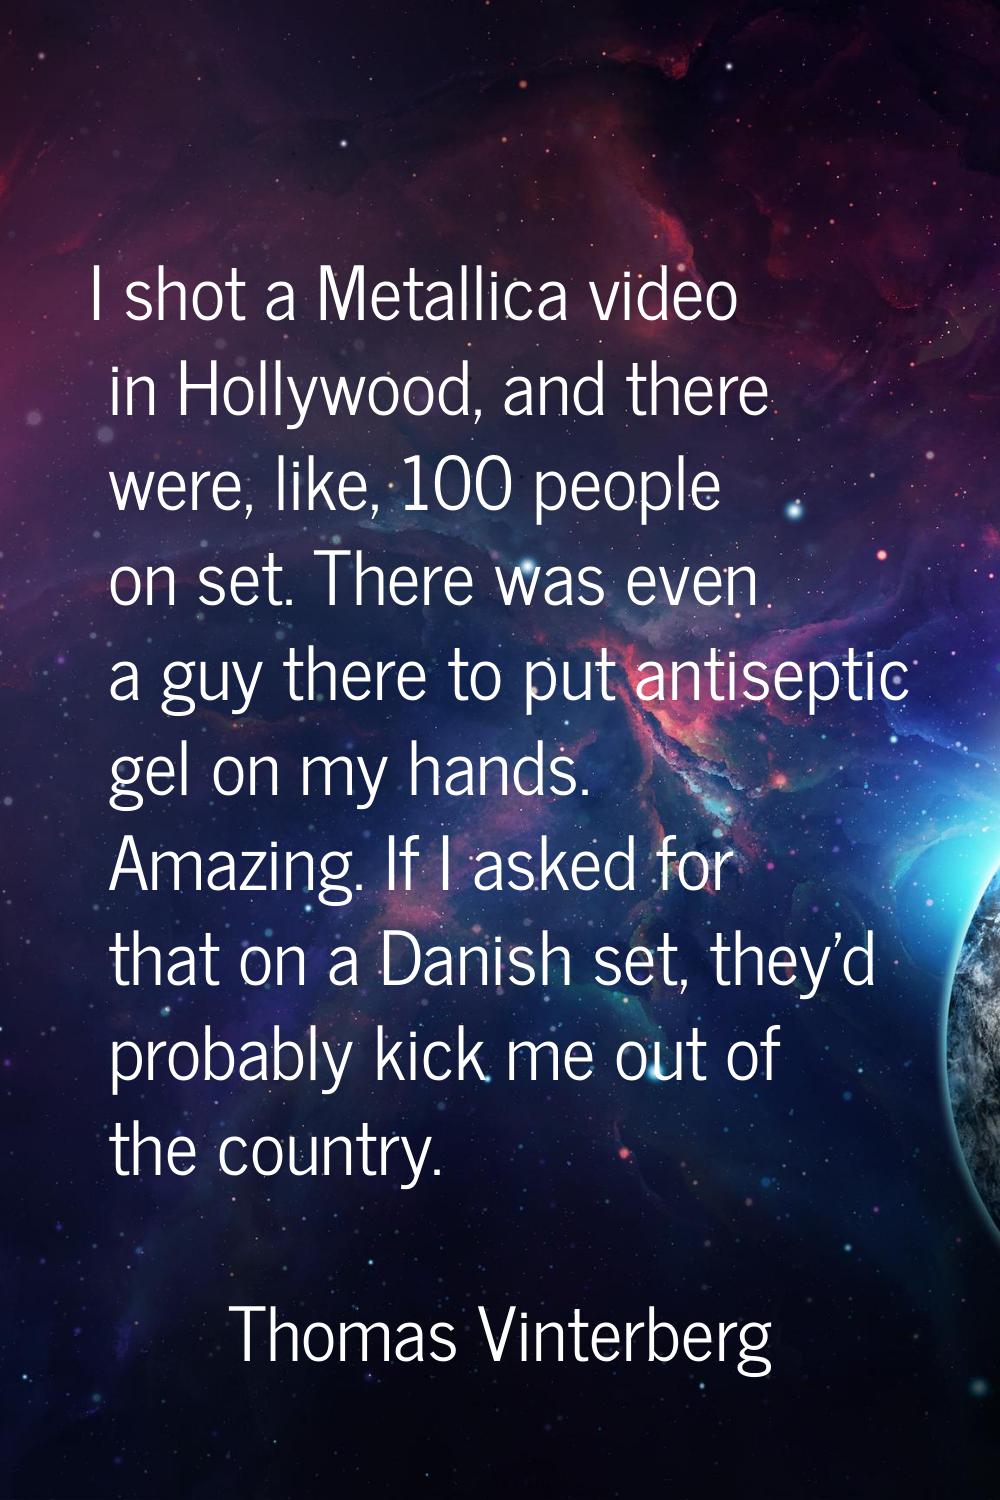 I shot a Metallica video in Hollywood, and there were, like, 100 people on set. There was even a gu